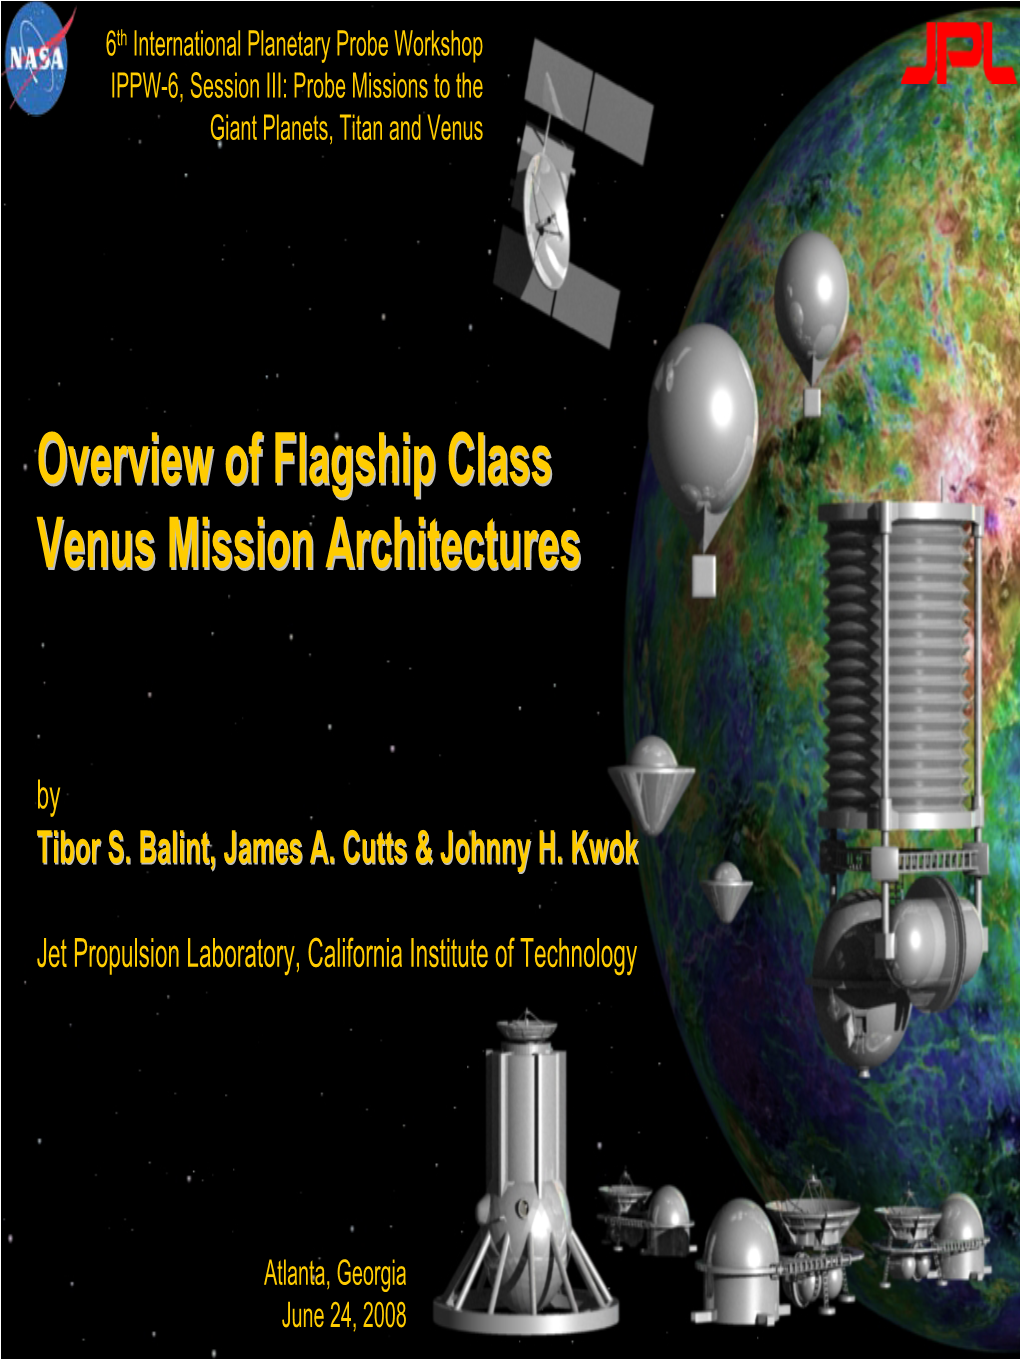 Overview of Flagship Class Venus Mission Architectures